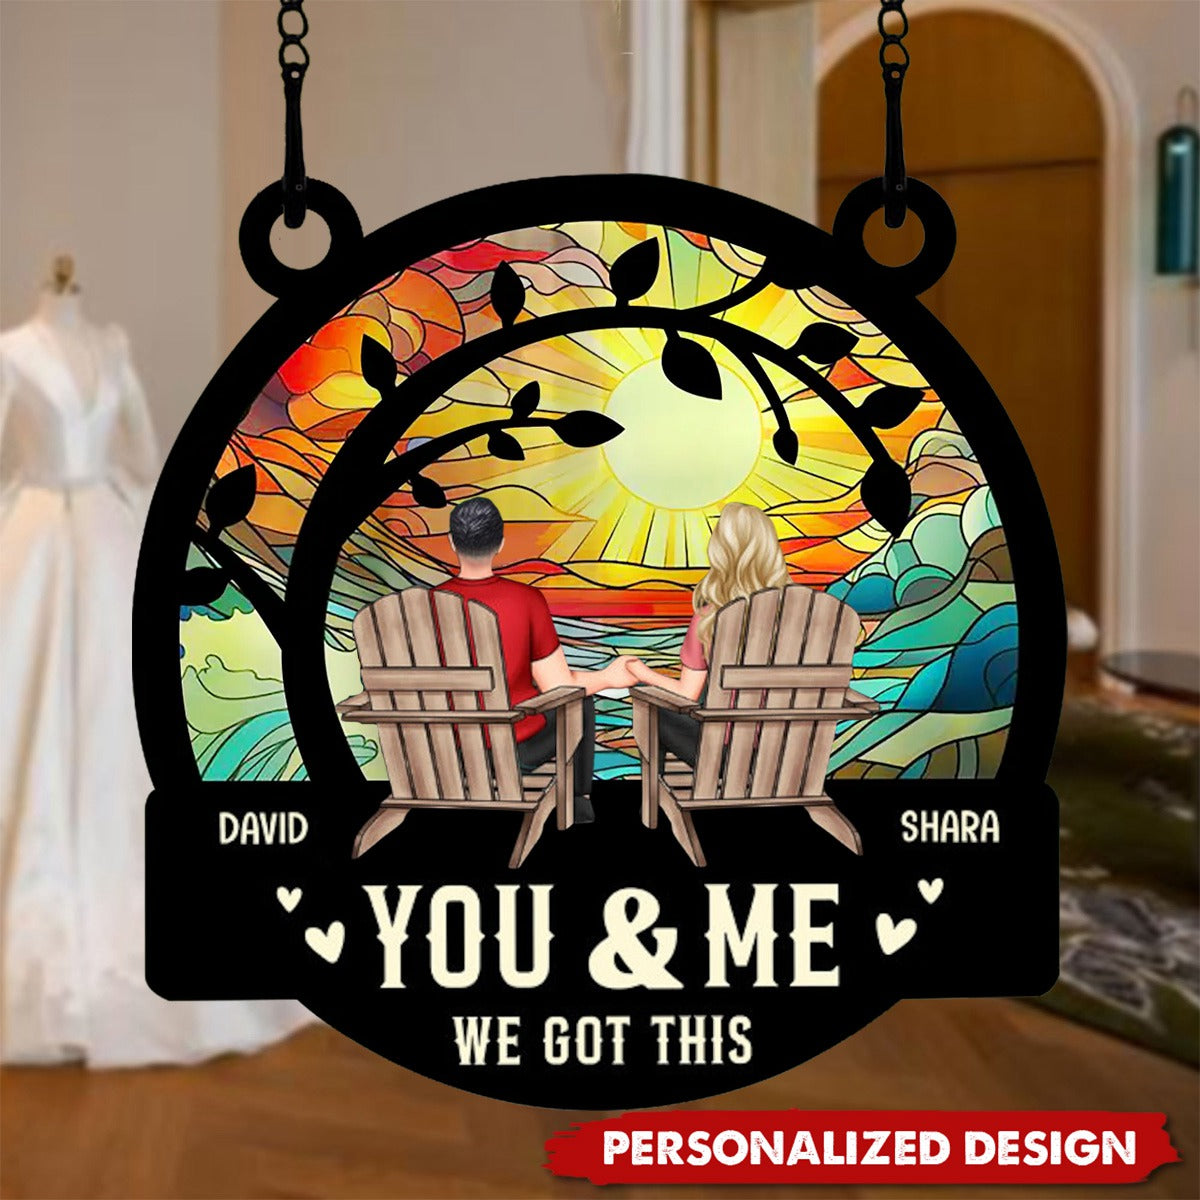 You & Me We Got This -Personalized Window Hanging Suncatcher Ornament